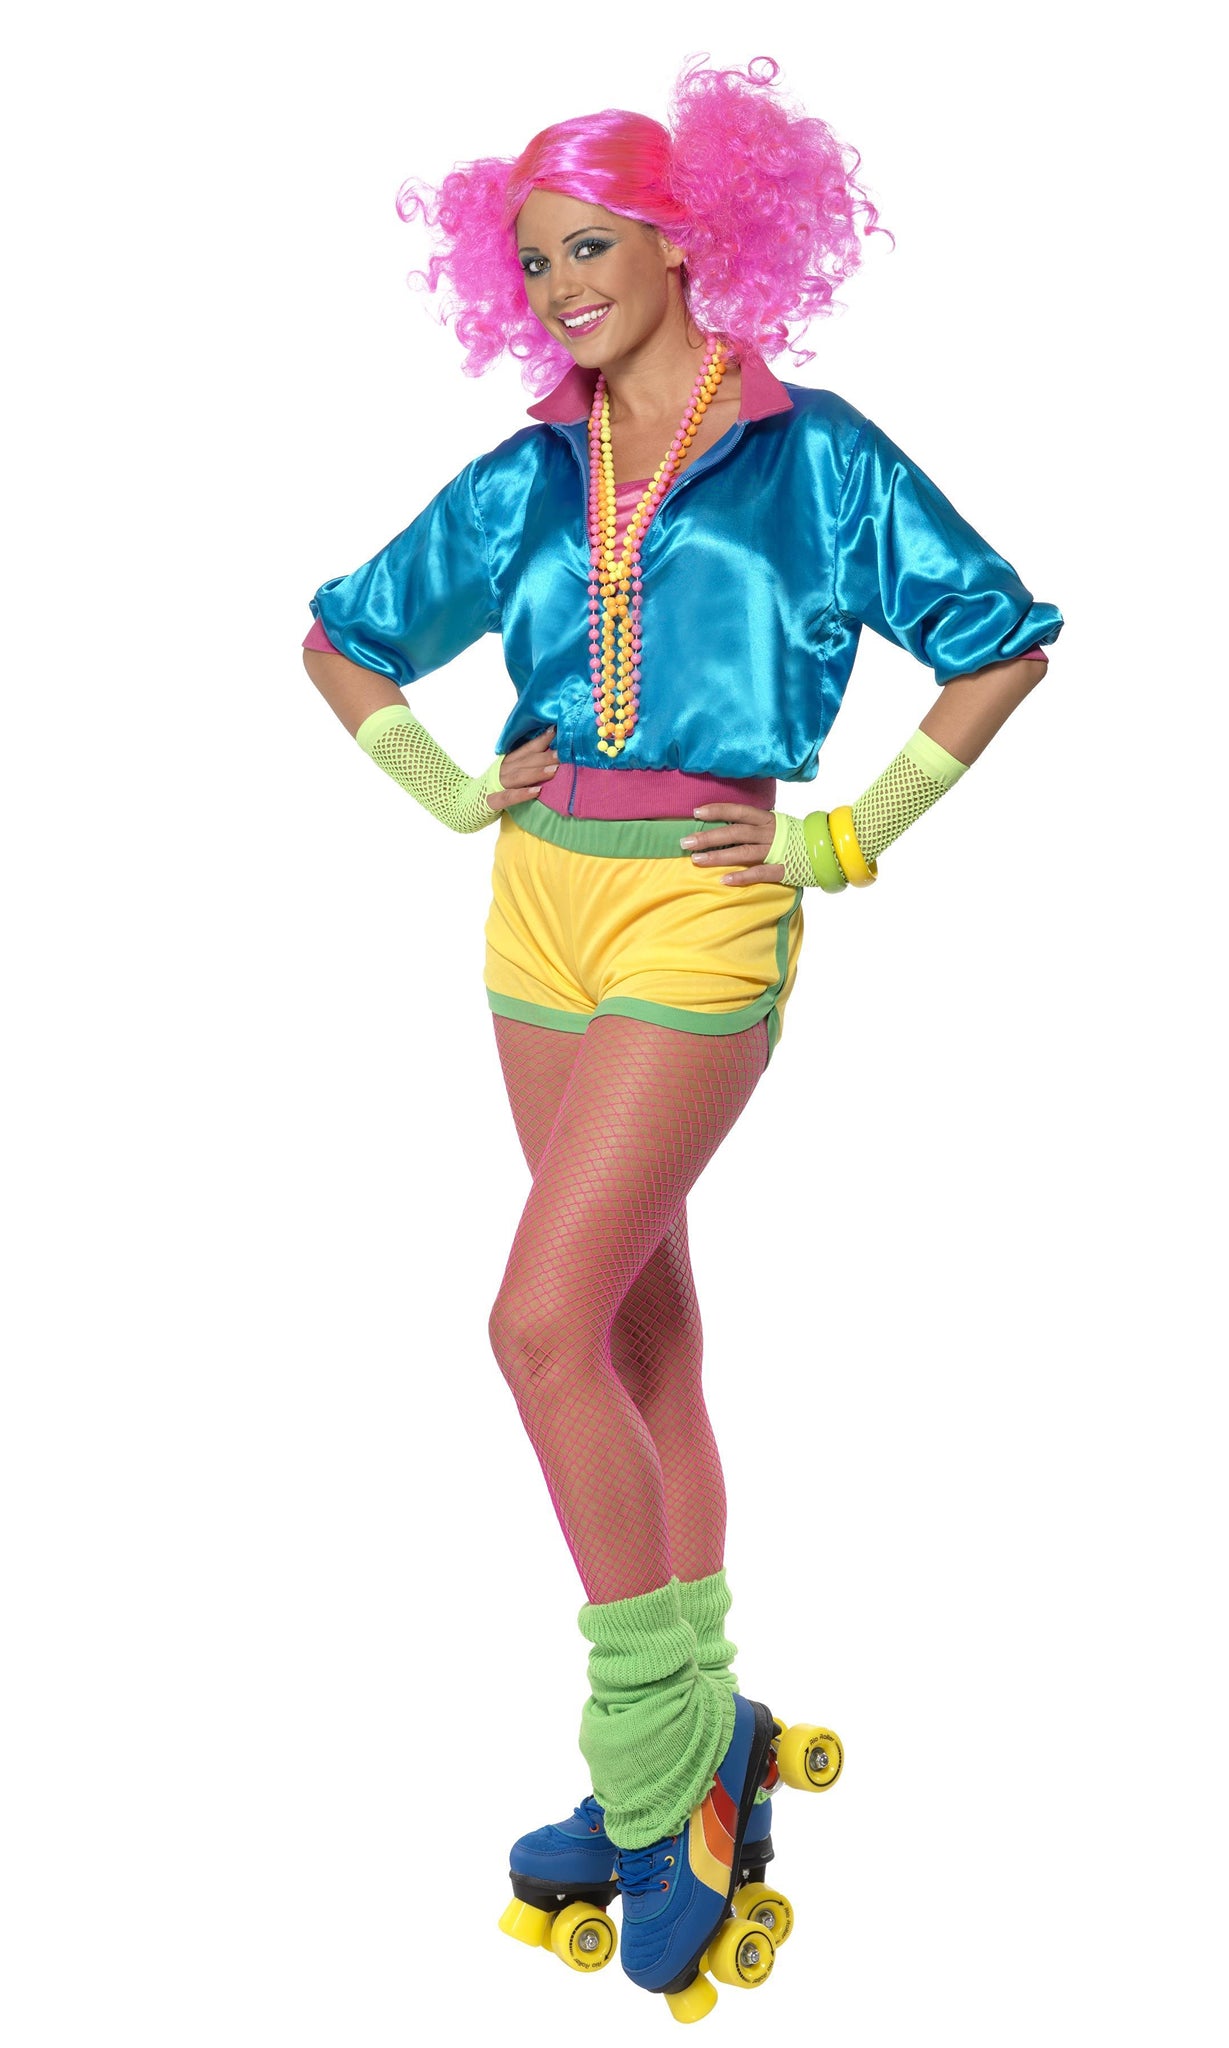 80s Roller Skating shorts in yellow with green and blue jacket with pink